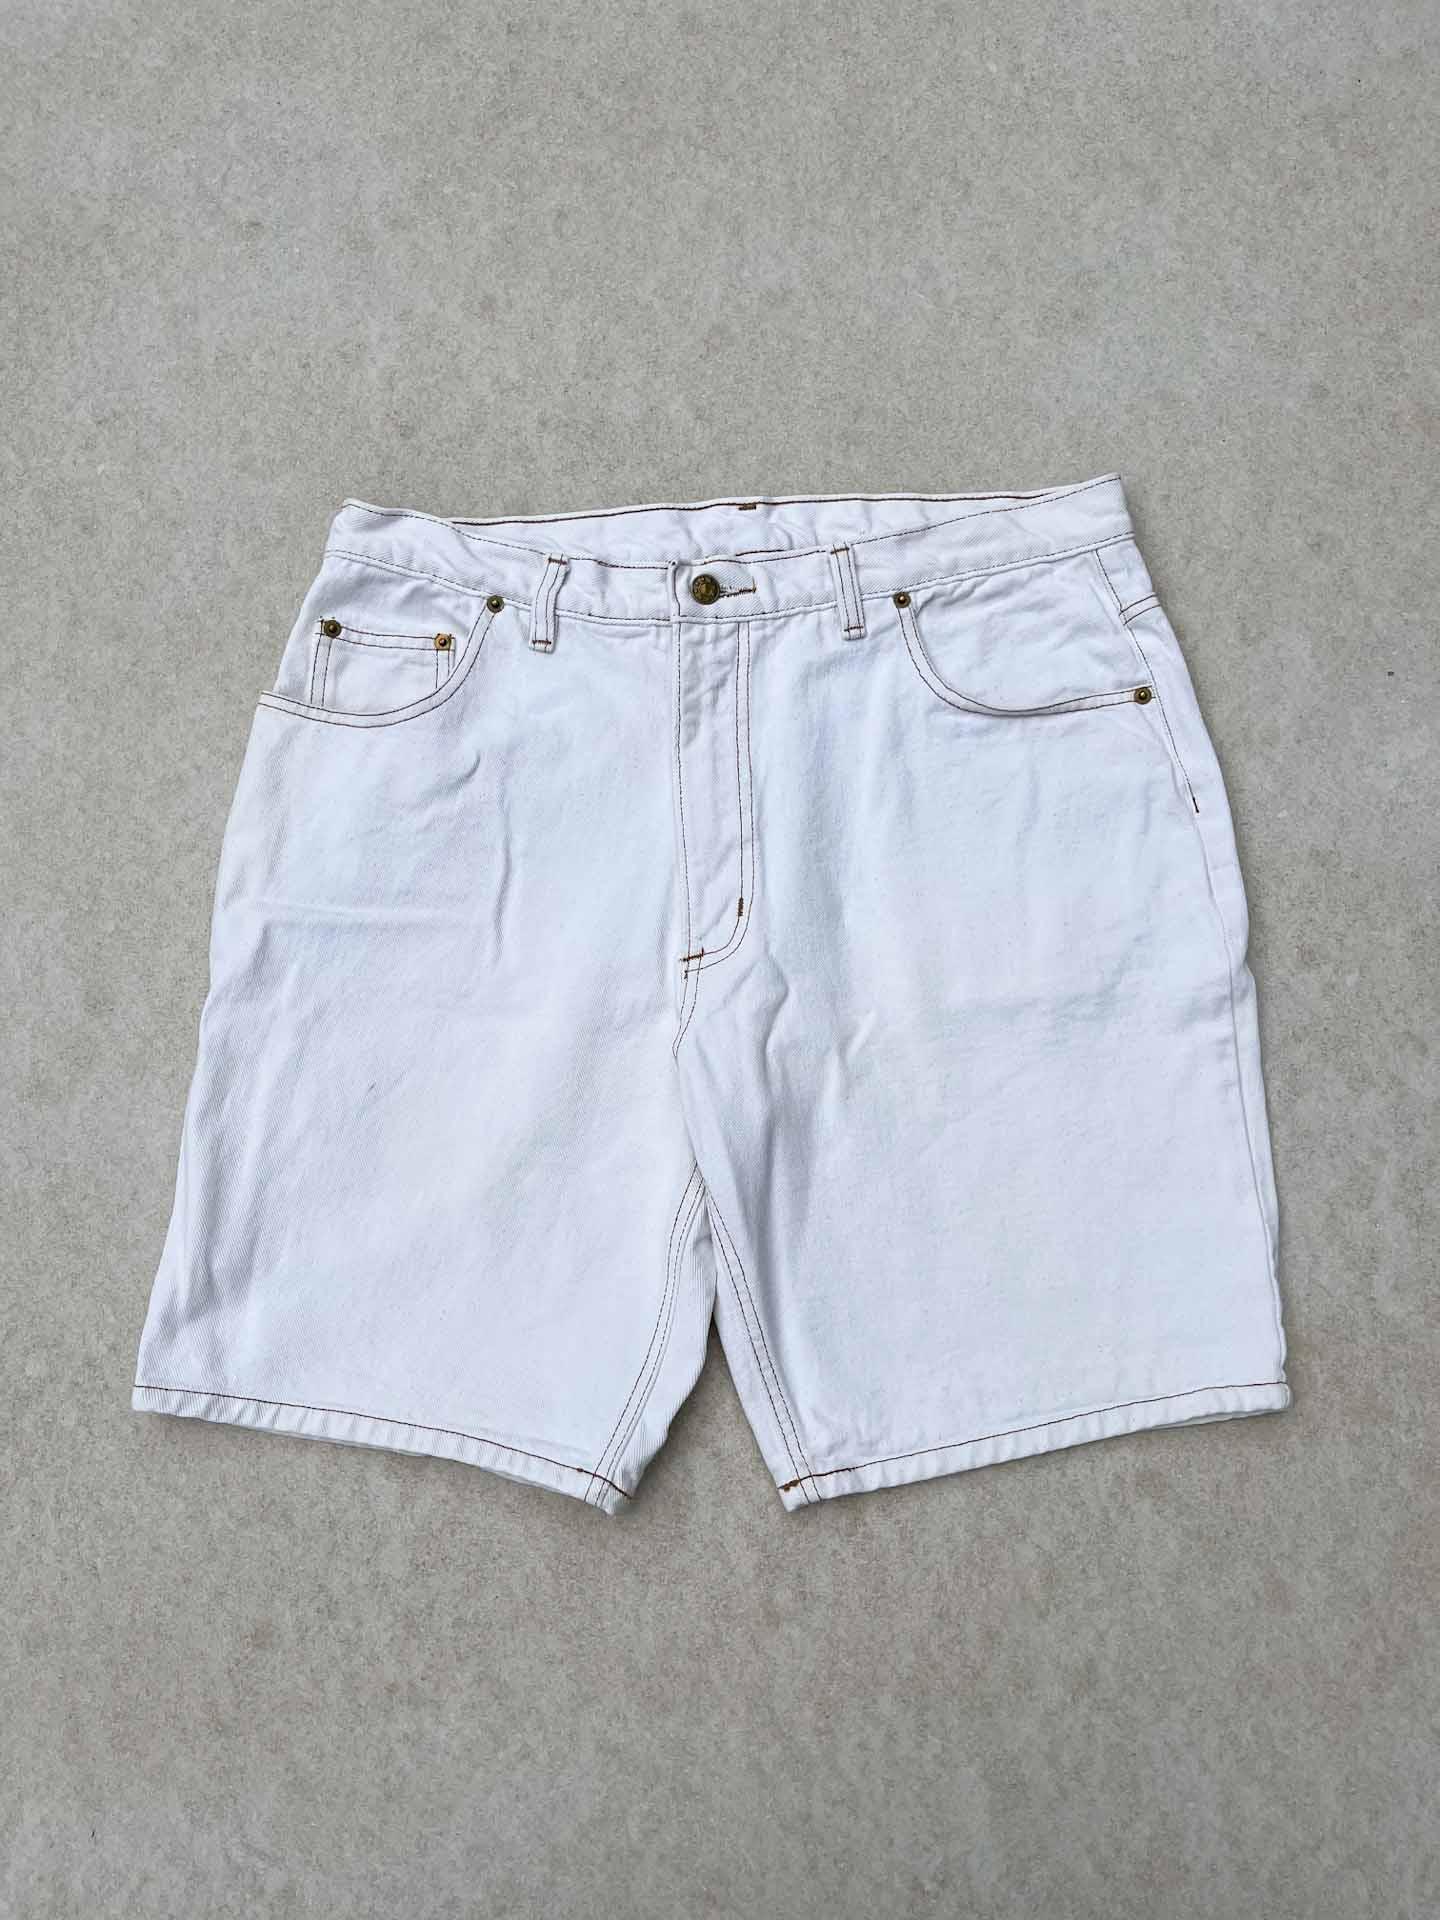 Fade Out (90s C&A) white jorts - secondvintage